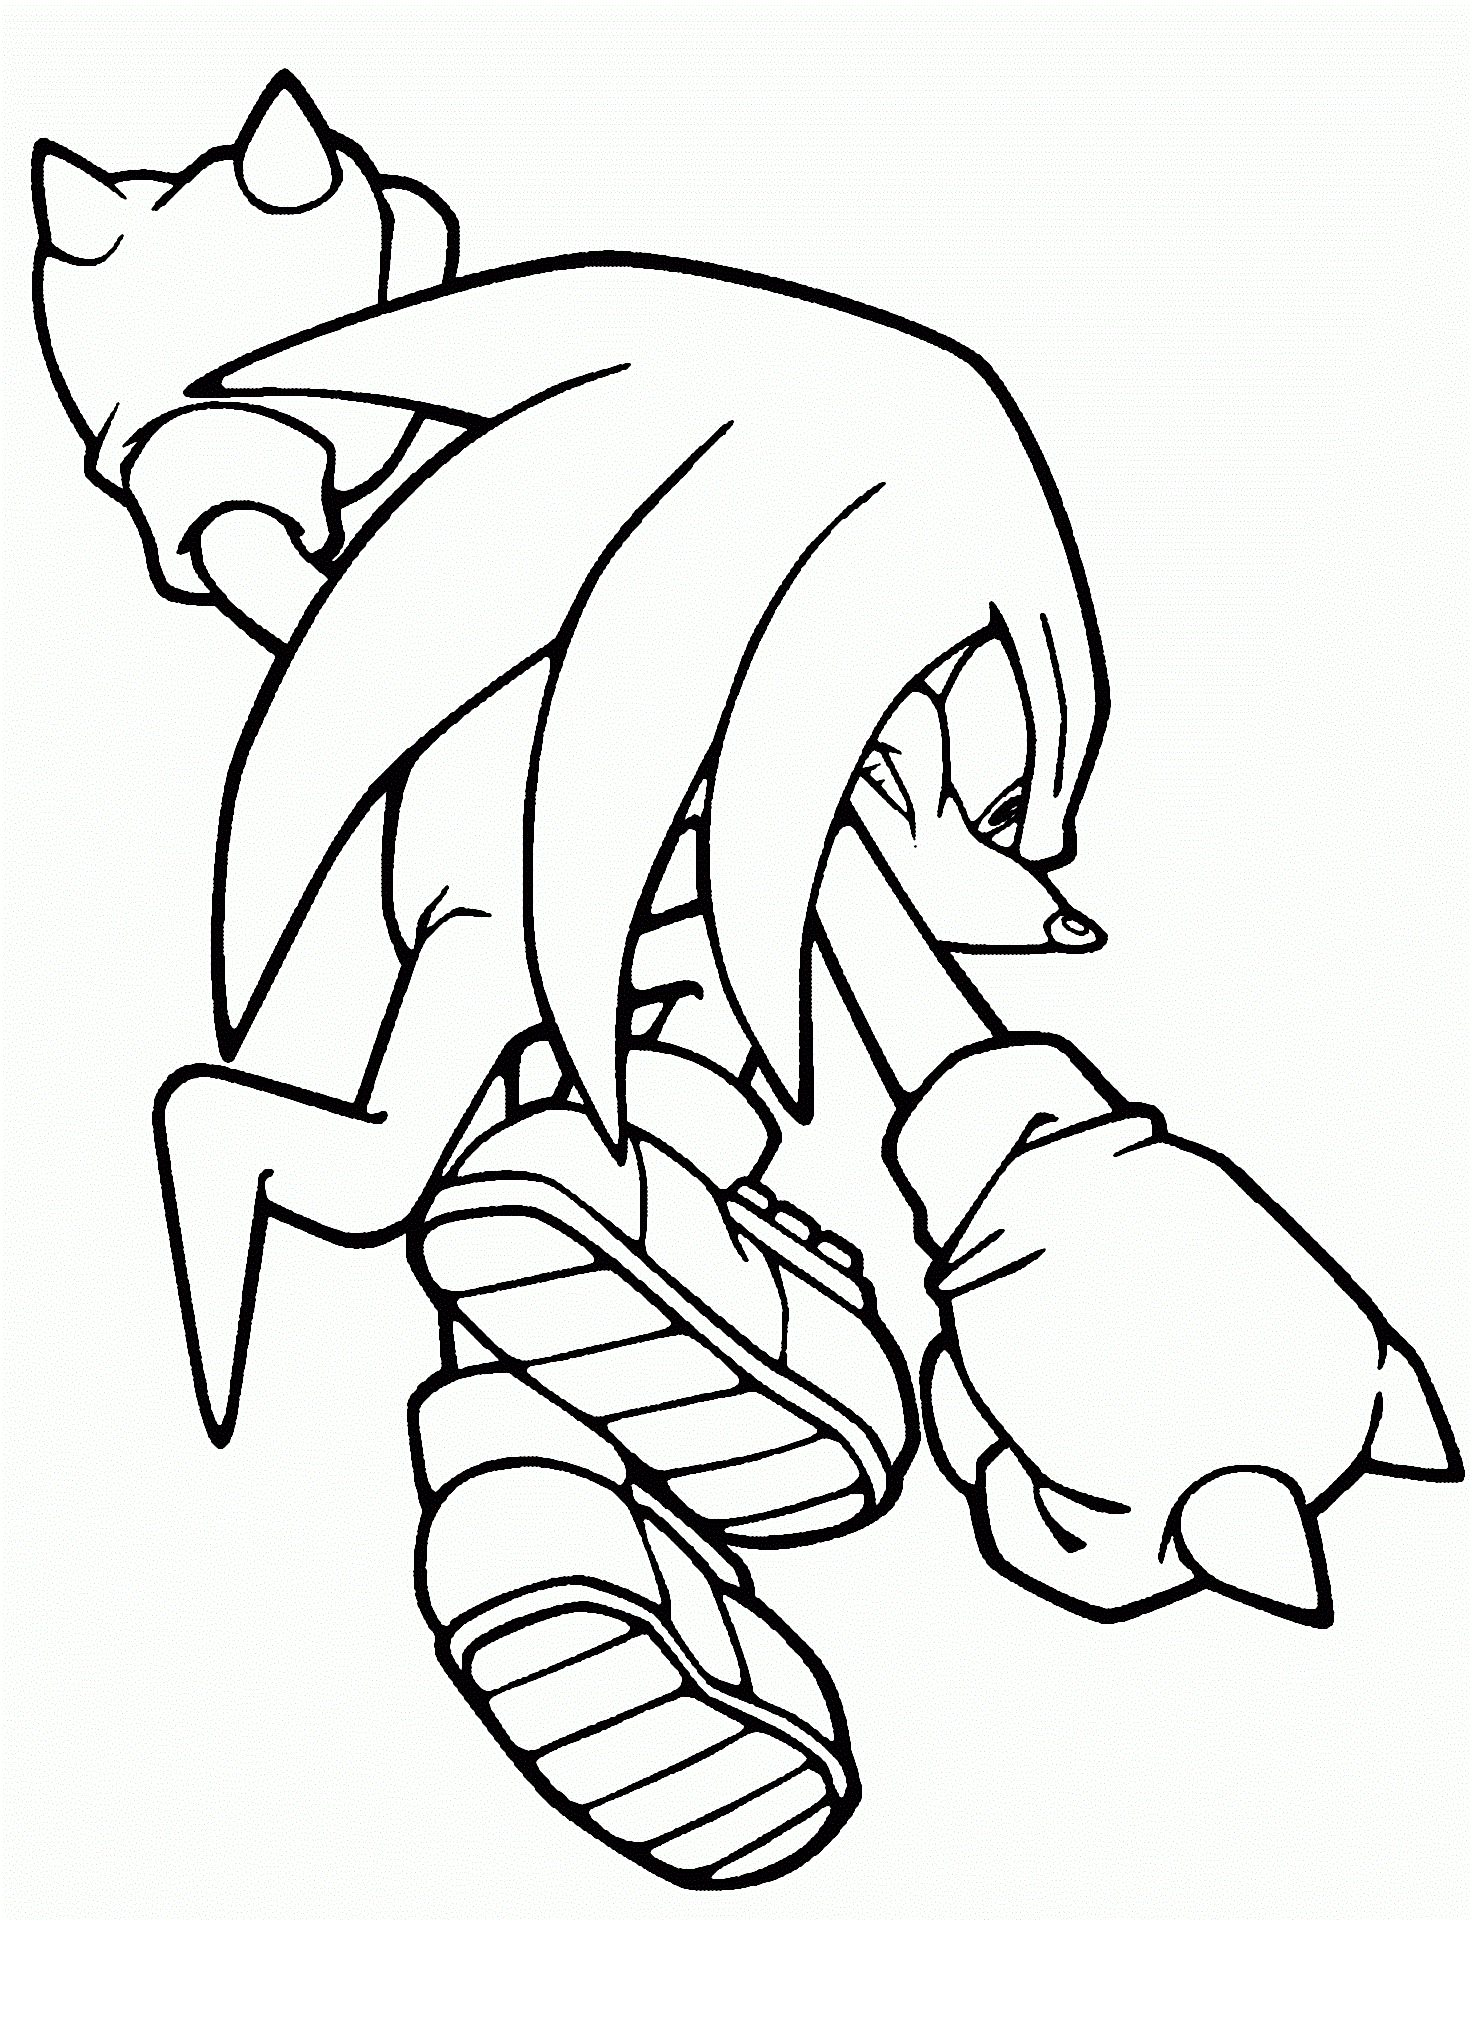 Printable Knuckles Coloring Pages - Free knuckles coloring pages